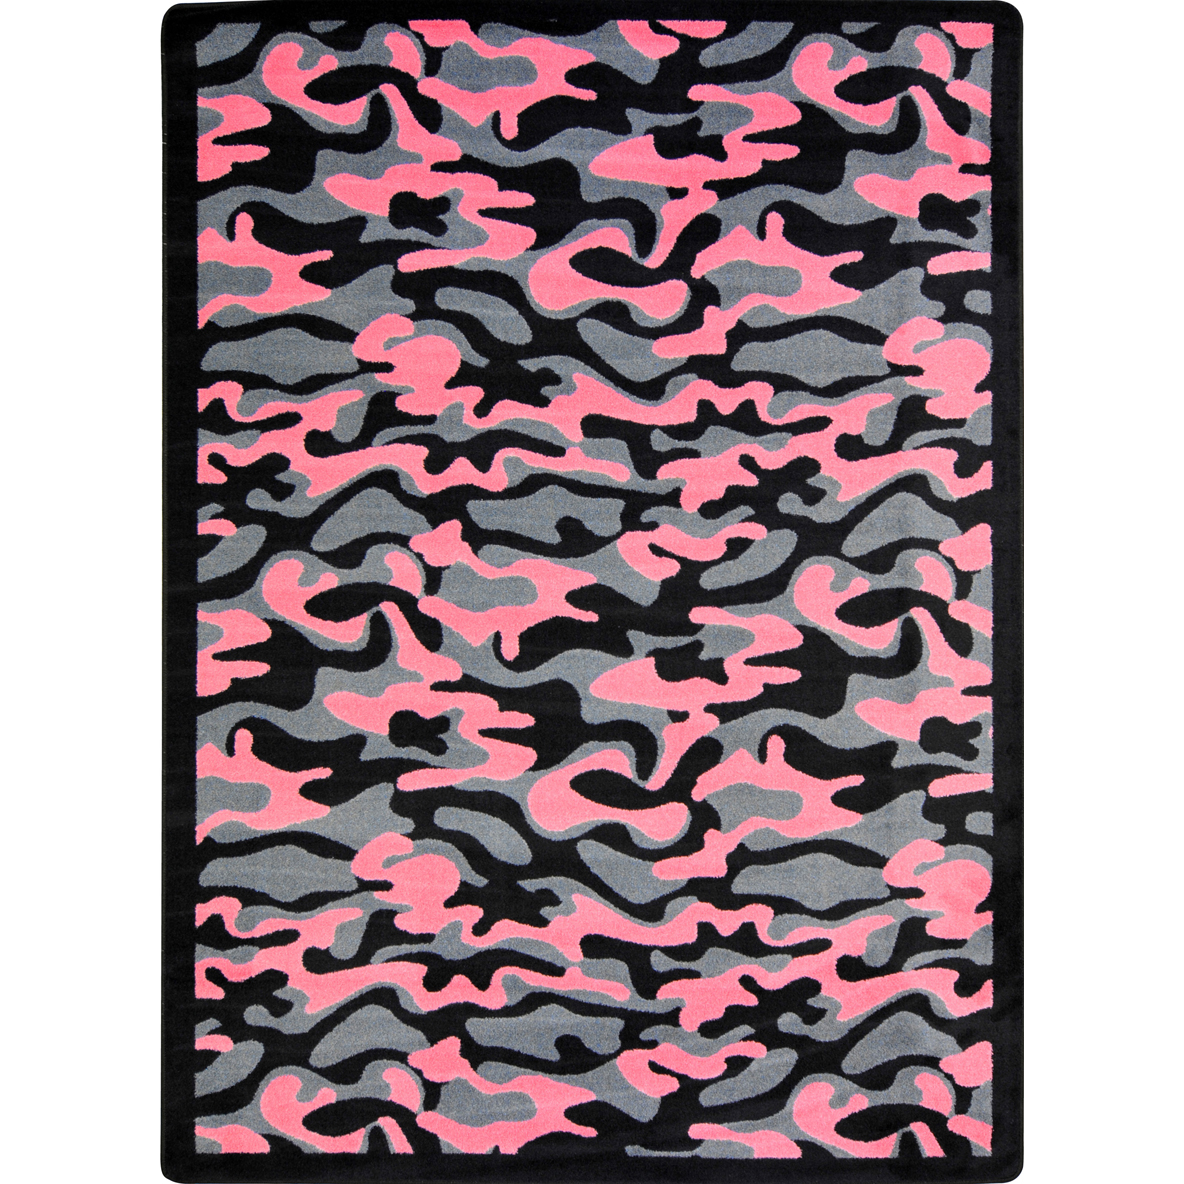 46-Inch by 64-Inch by 0.36-Inch Dark Army Joy Carpets Kaleidoscope Funky Camo Whimsical Area Rugs 